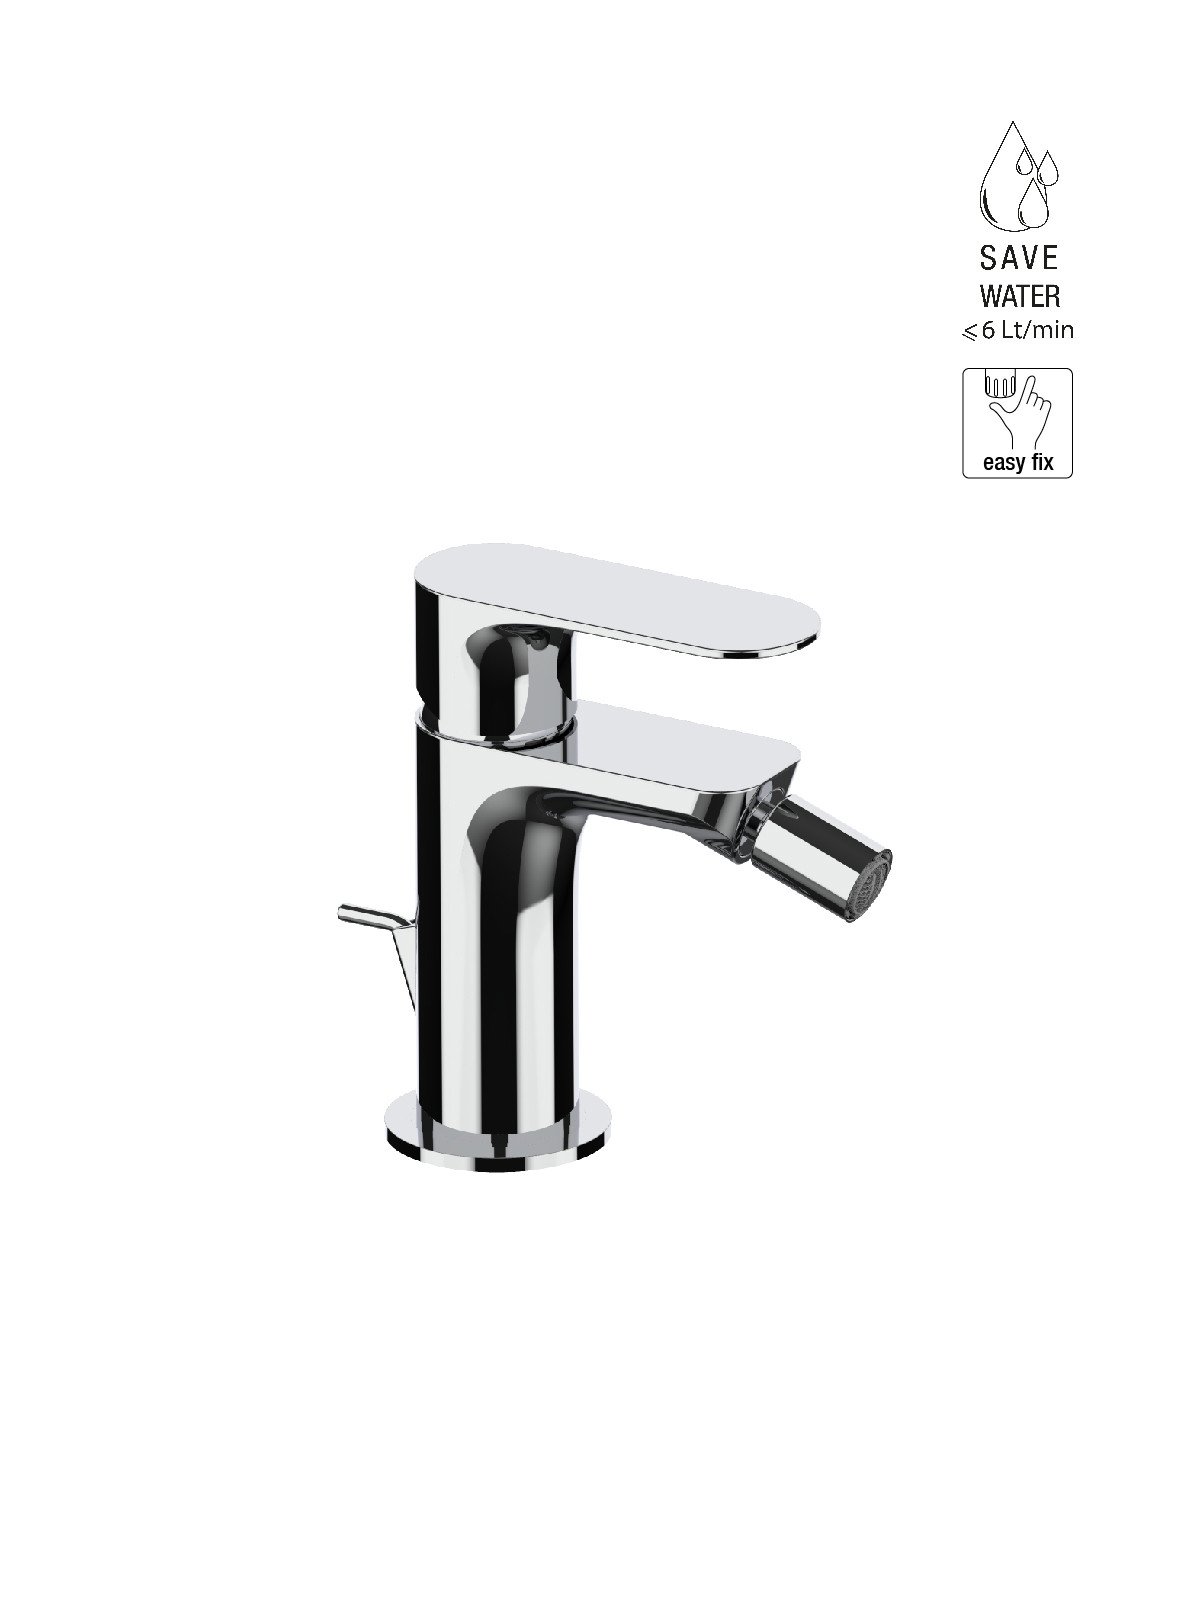 Single-lever bidet mixer with pop-up waste